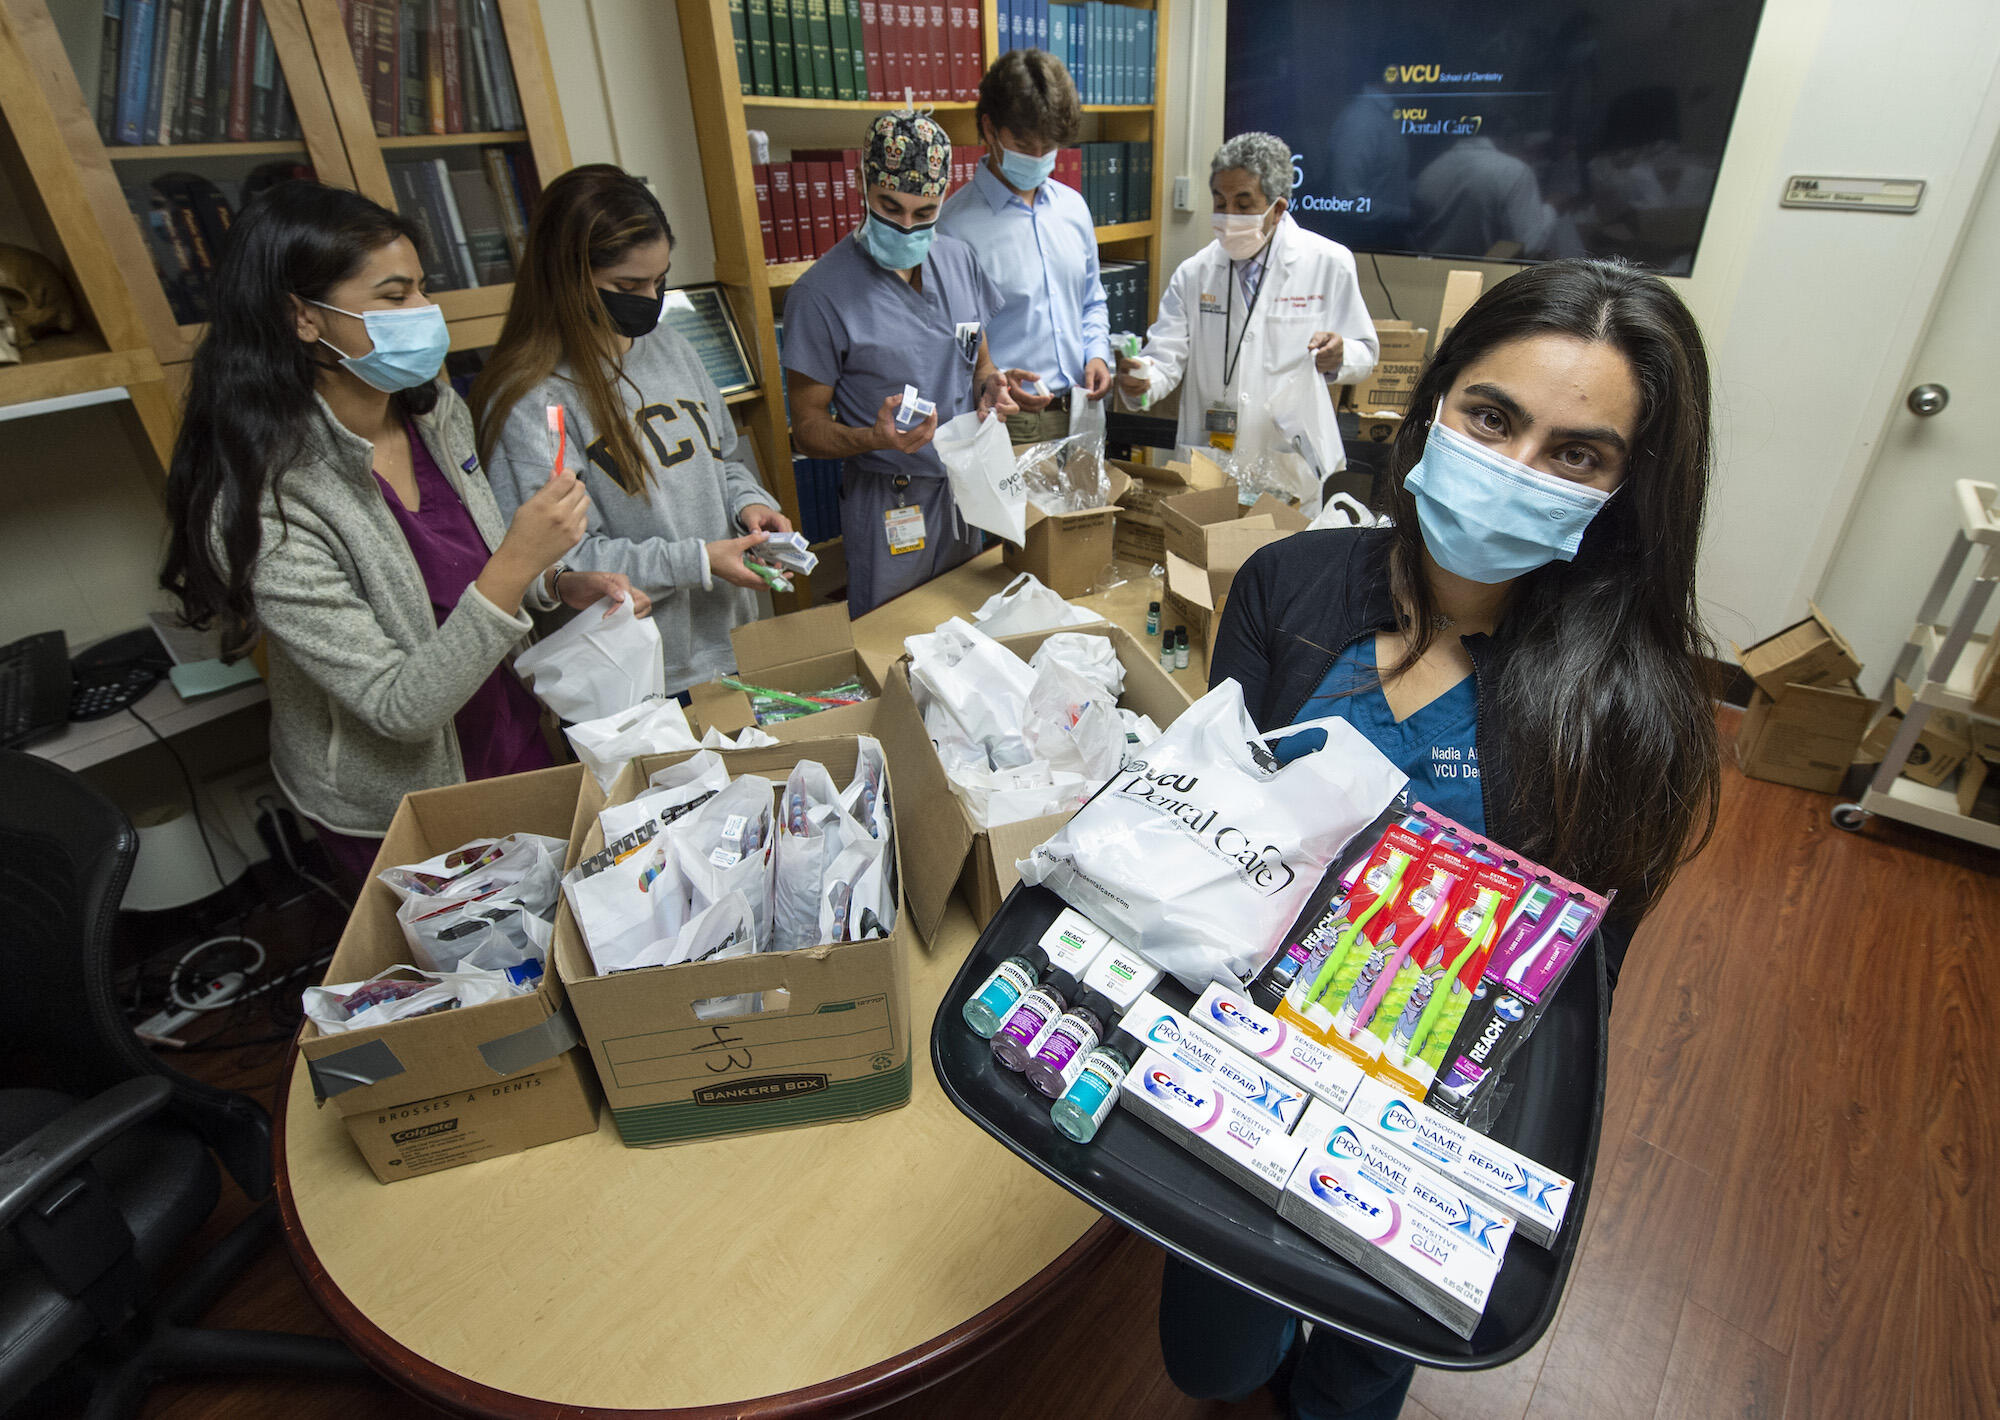 Nadia Abdul-Ghafoor, far right, holding a dental supply kit in a conference room surrounded by classmates and faculty from the VCU dental school